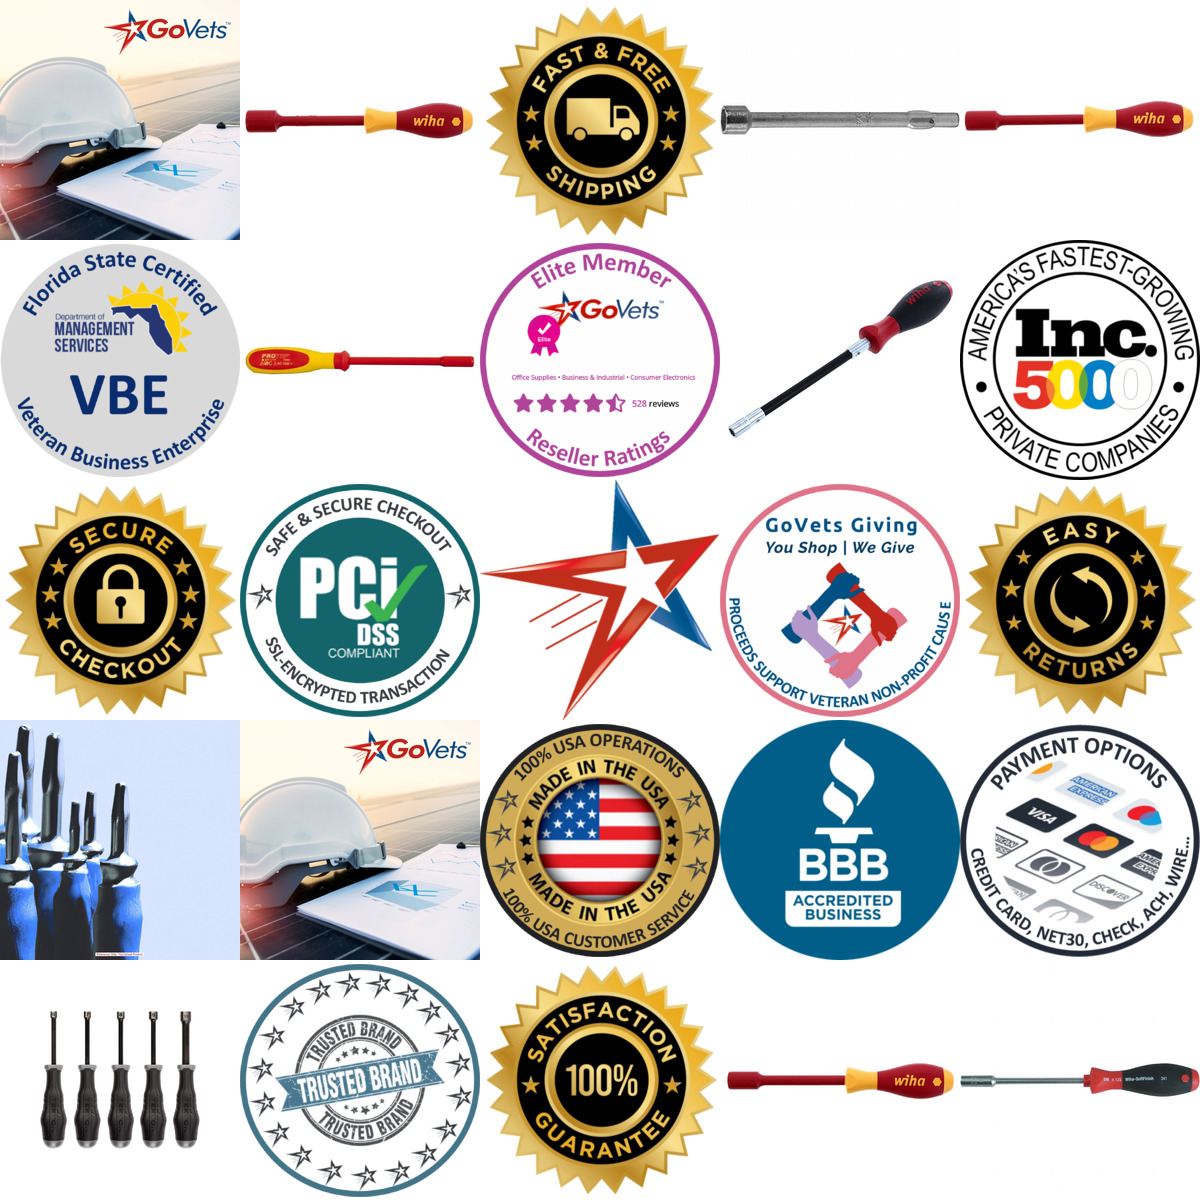 A selection of Screwdriver Sets products on GoVets